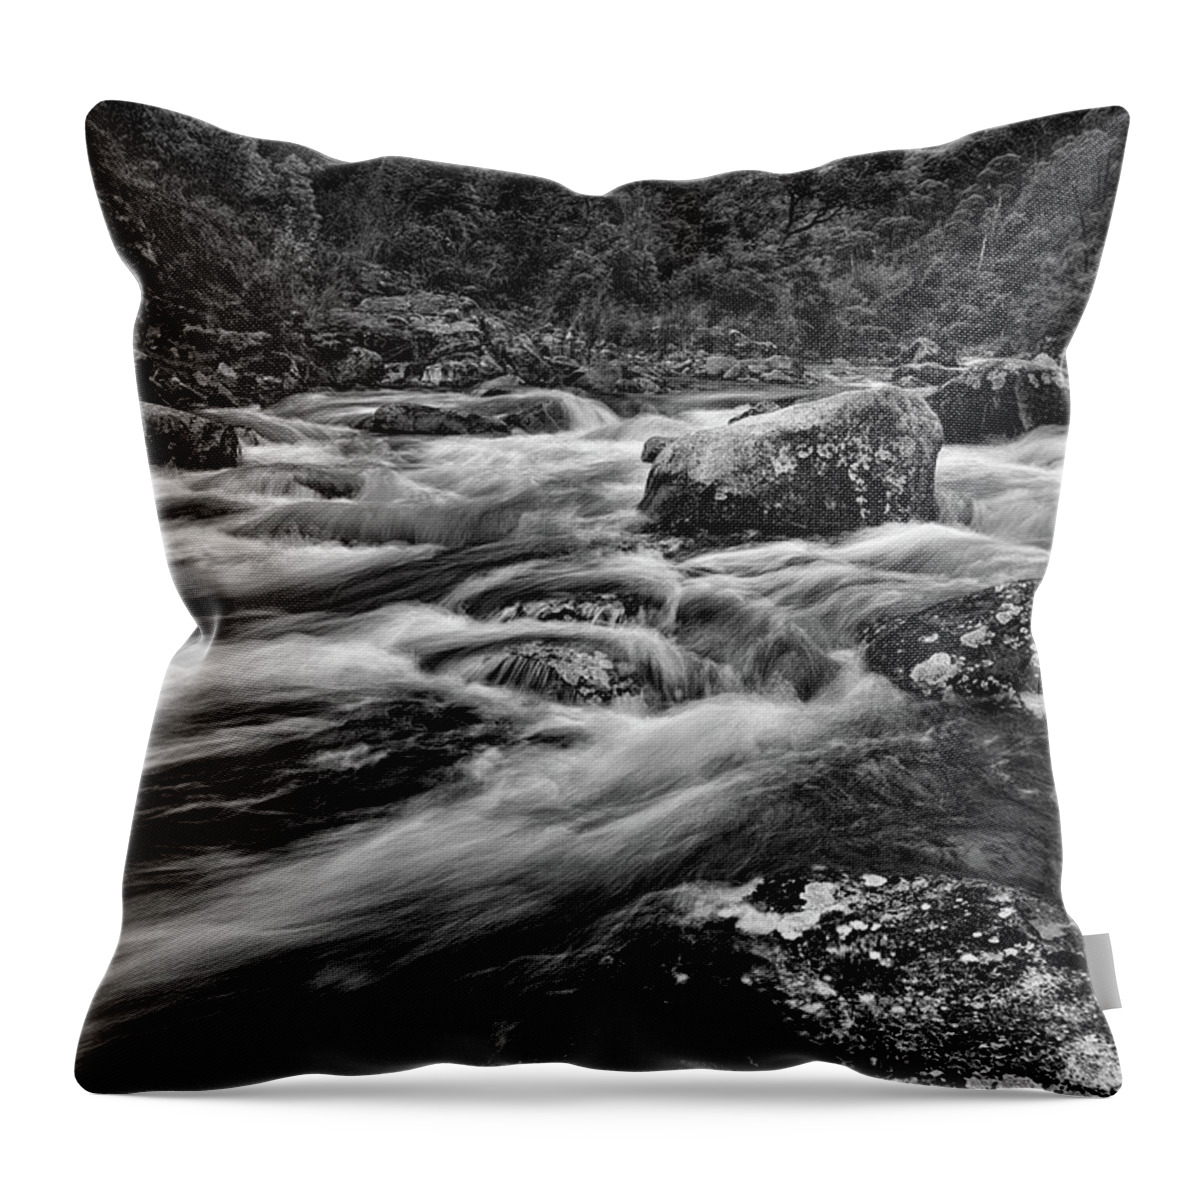 East Kiewa River Throw Pillow featuring the photograph Mixed Emotions by Mark Lucey